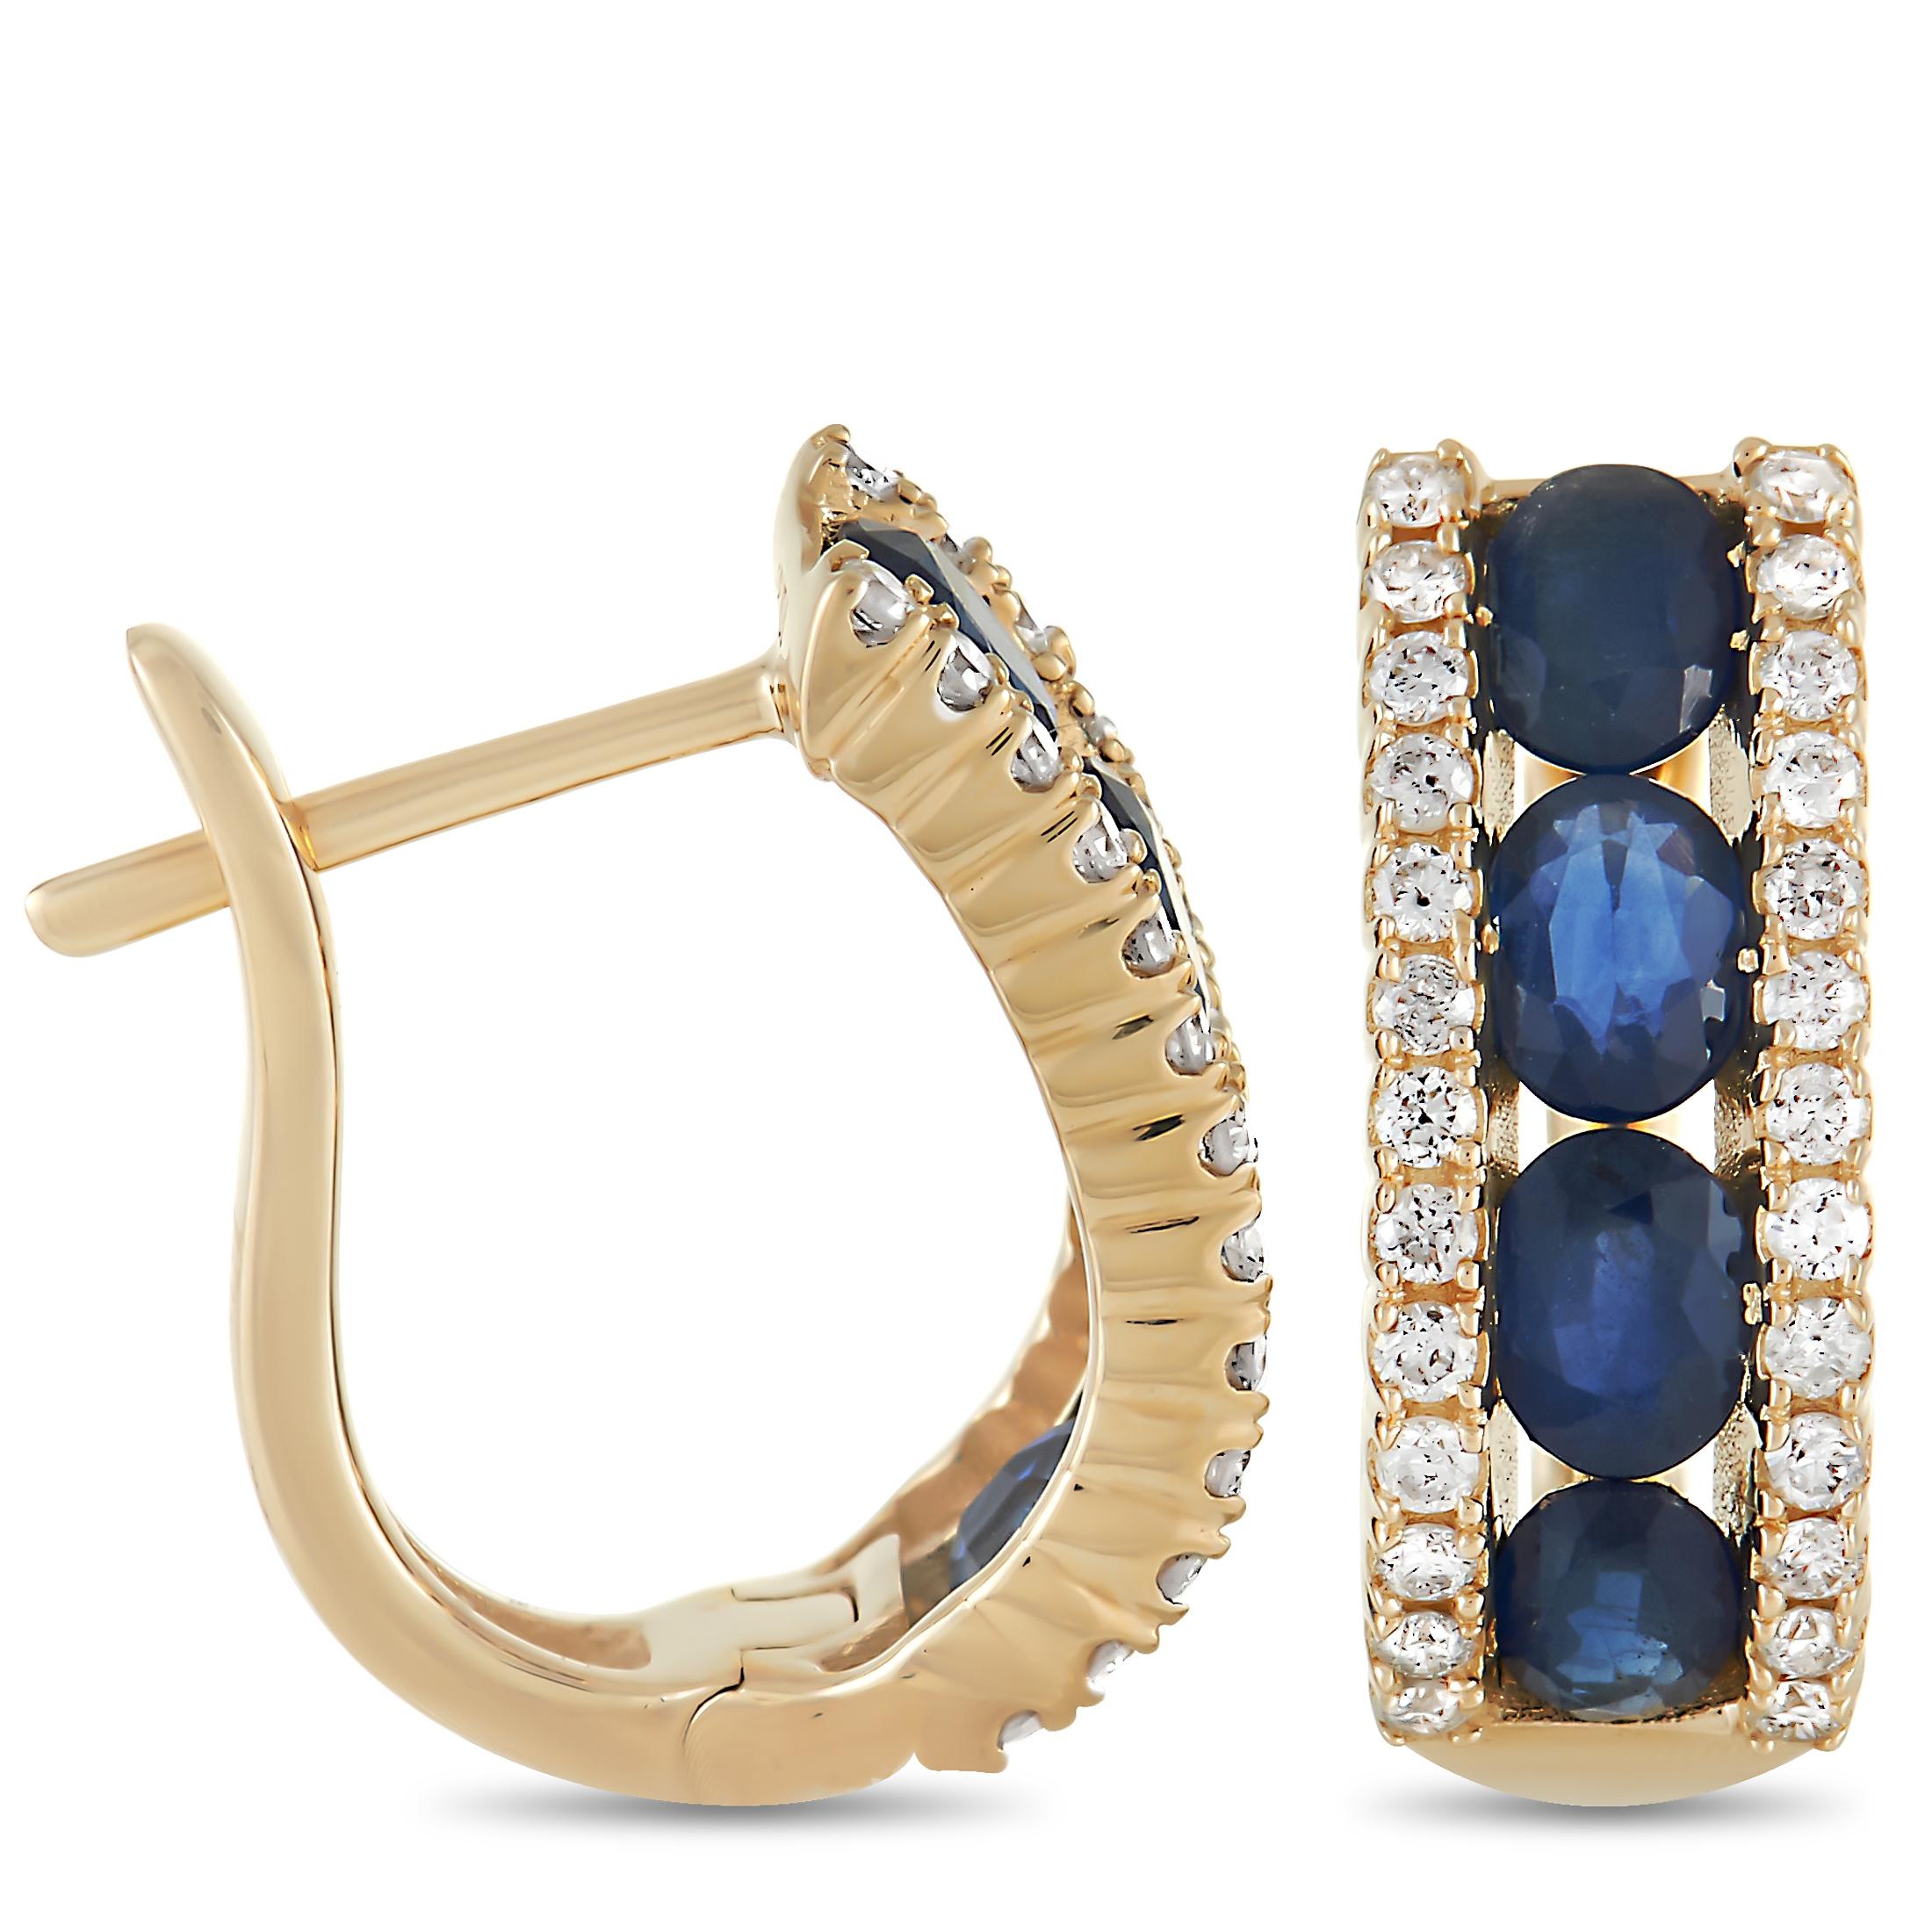 These glamorous earrings are made with 14K yellow gold and are set with a single row of sapphires in the center of each hoop, flanked on either side by a row of small round cut diamonds totaling 0.39 carats. The earrings measure 0.57 inches in